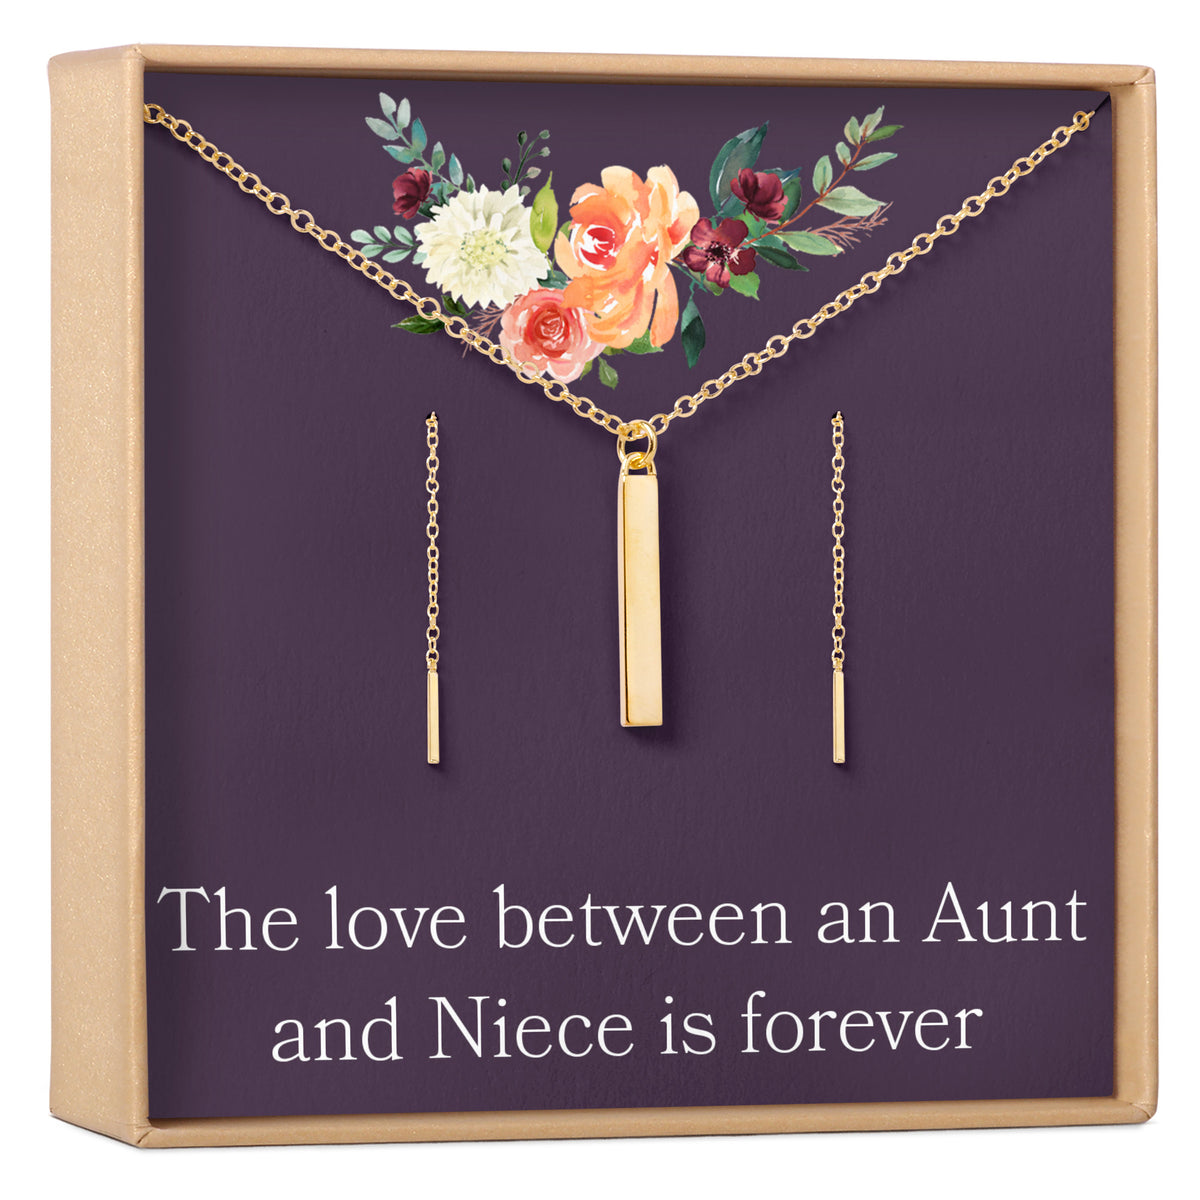 Aunt-Niece Gold Bar Earring Threader and Necklace Jewelry Set